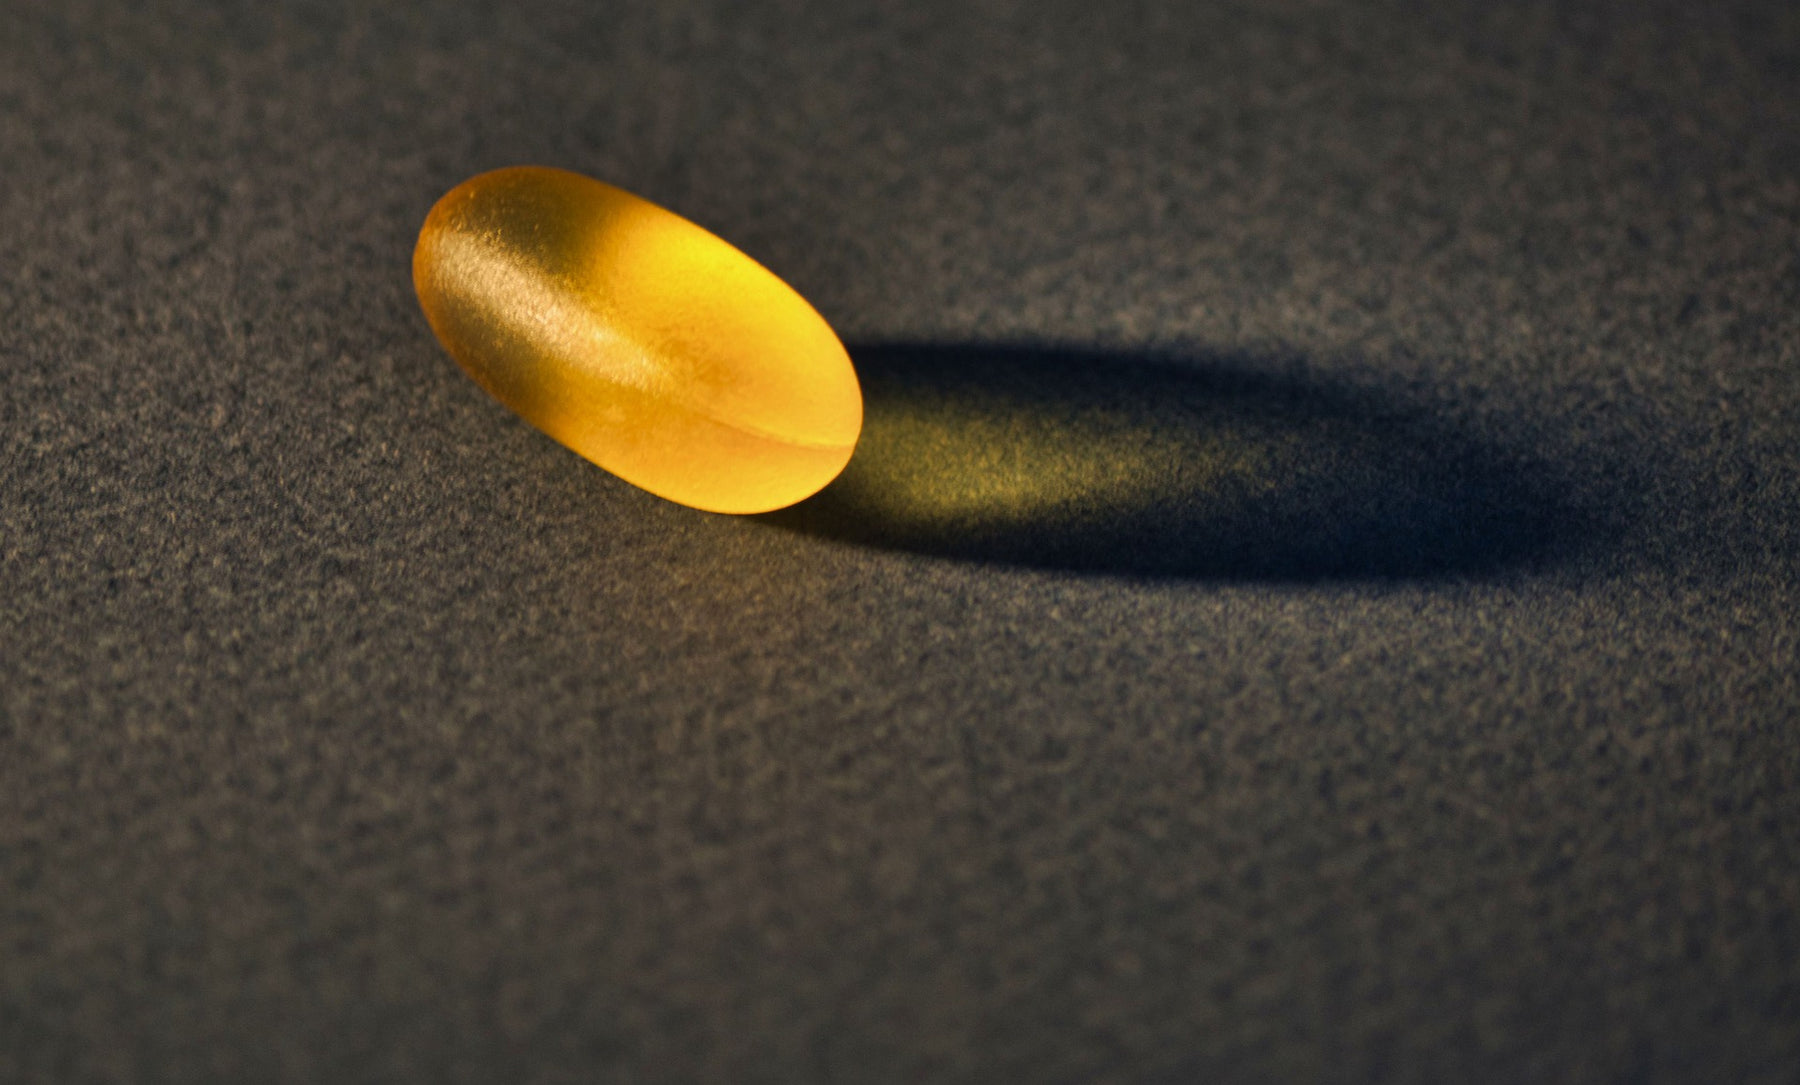 On pill and its shadow on a black surface